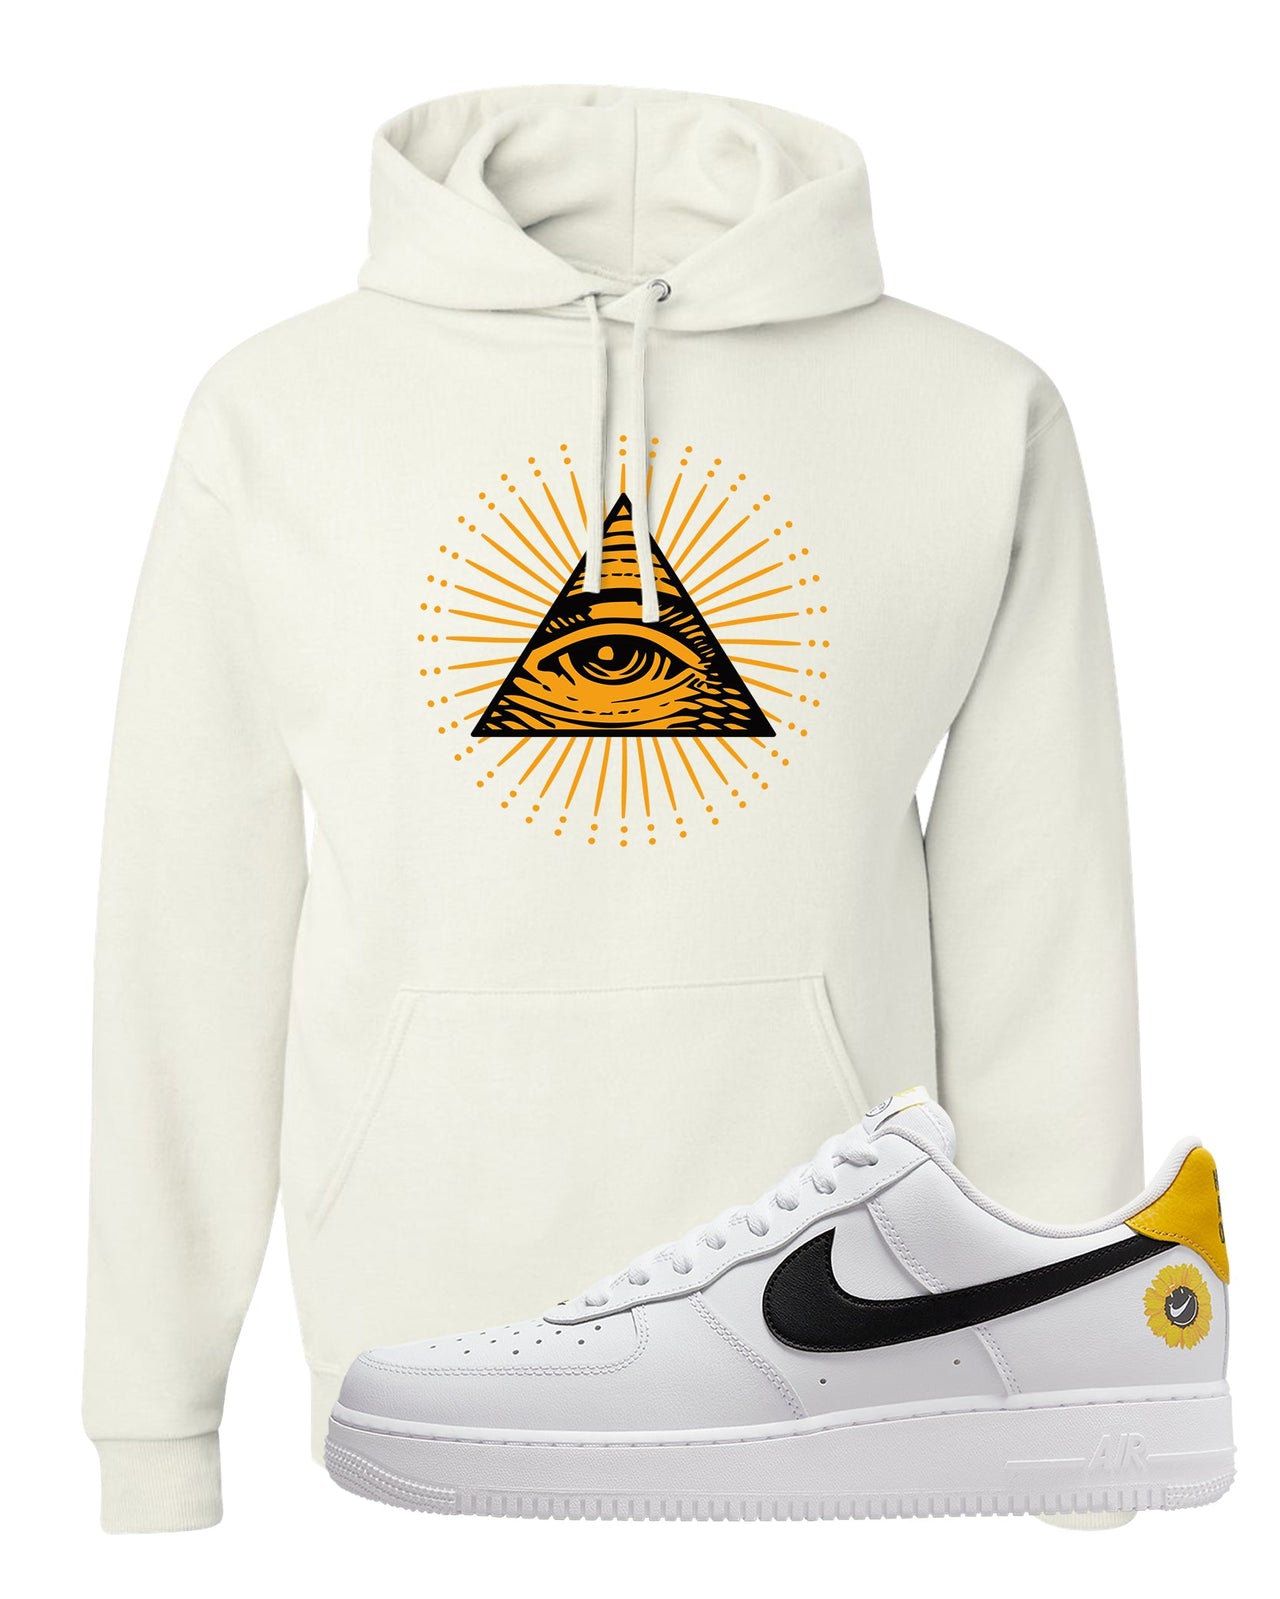 Have A Nice Day AF1s Hoodie | All Seeing Eye, White